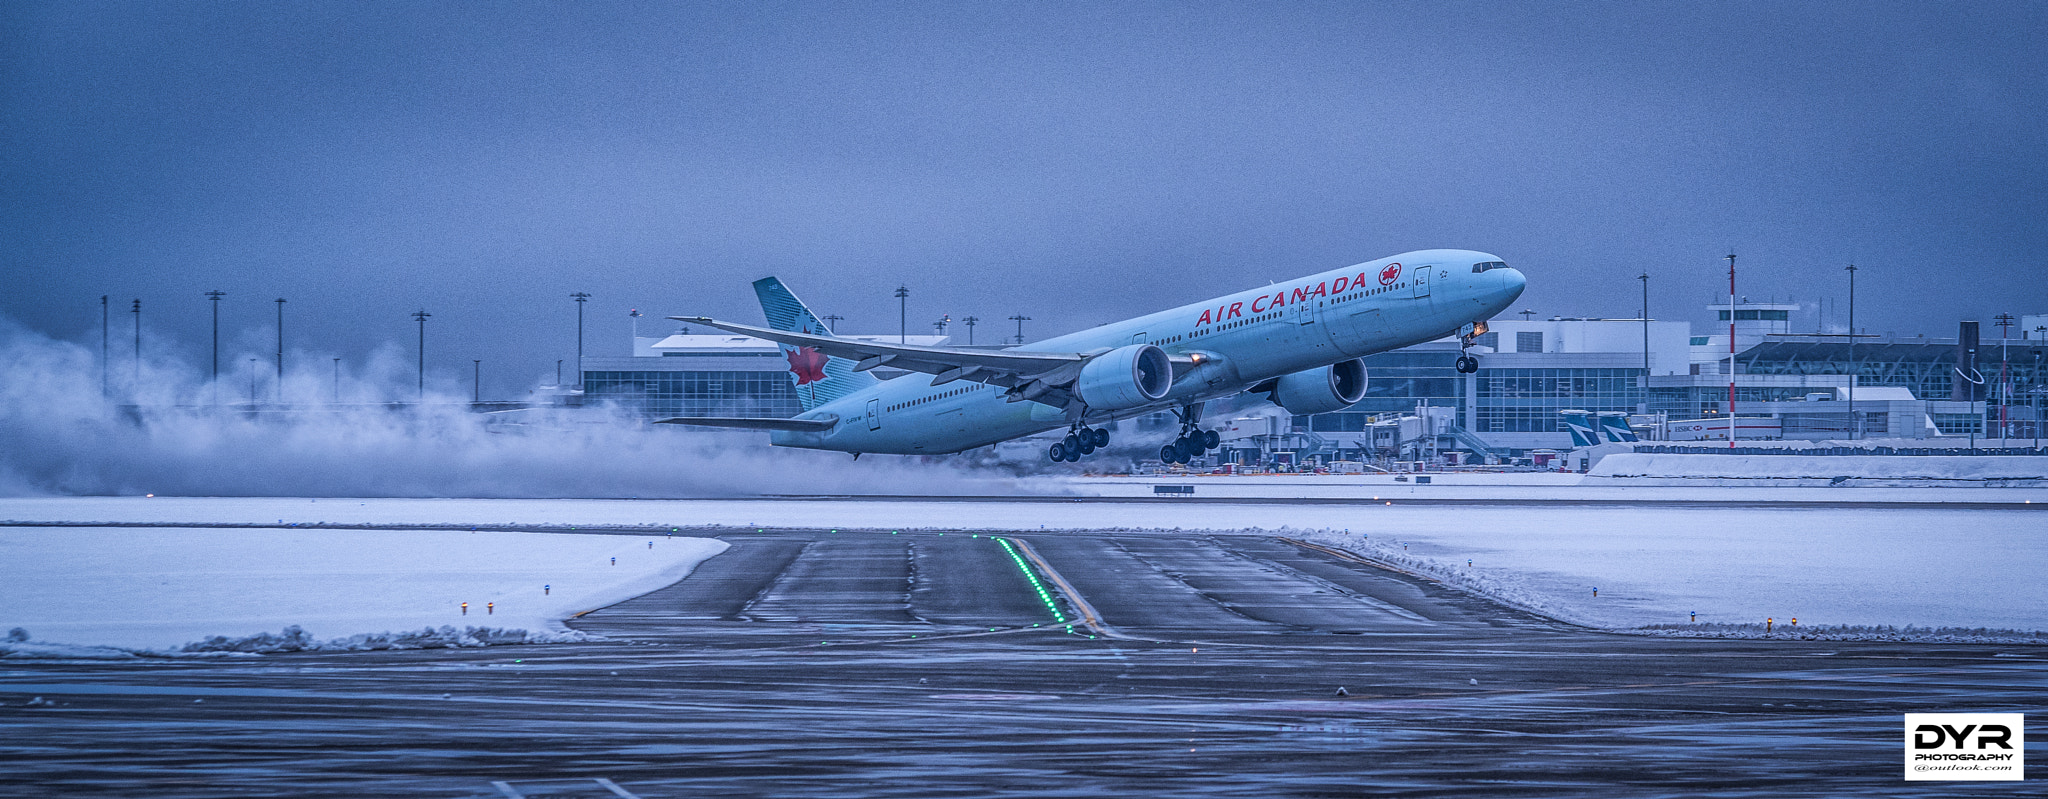 Pentax K-1 sample photo. An air canada flight departs yvr airport. photography